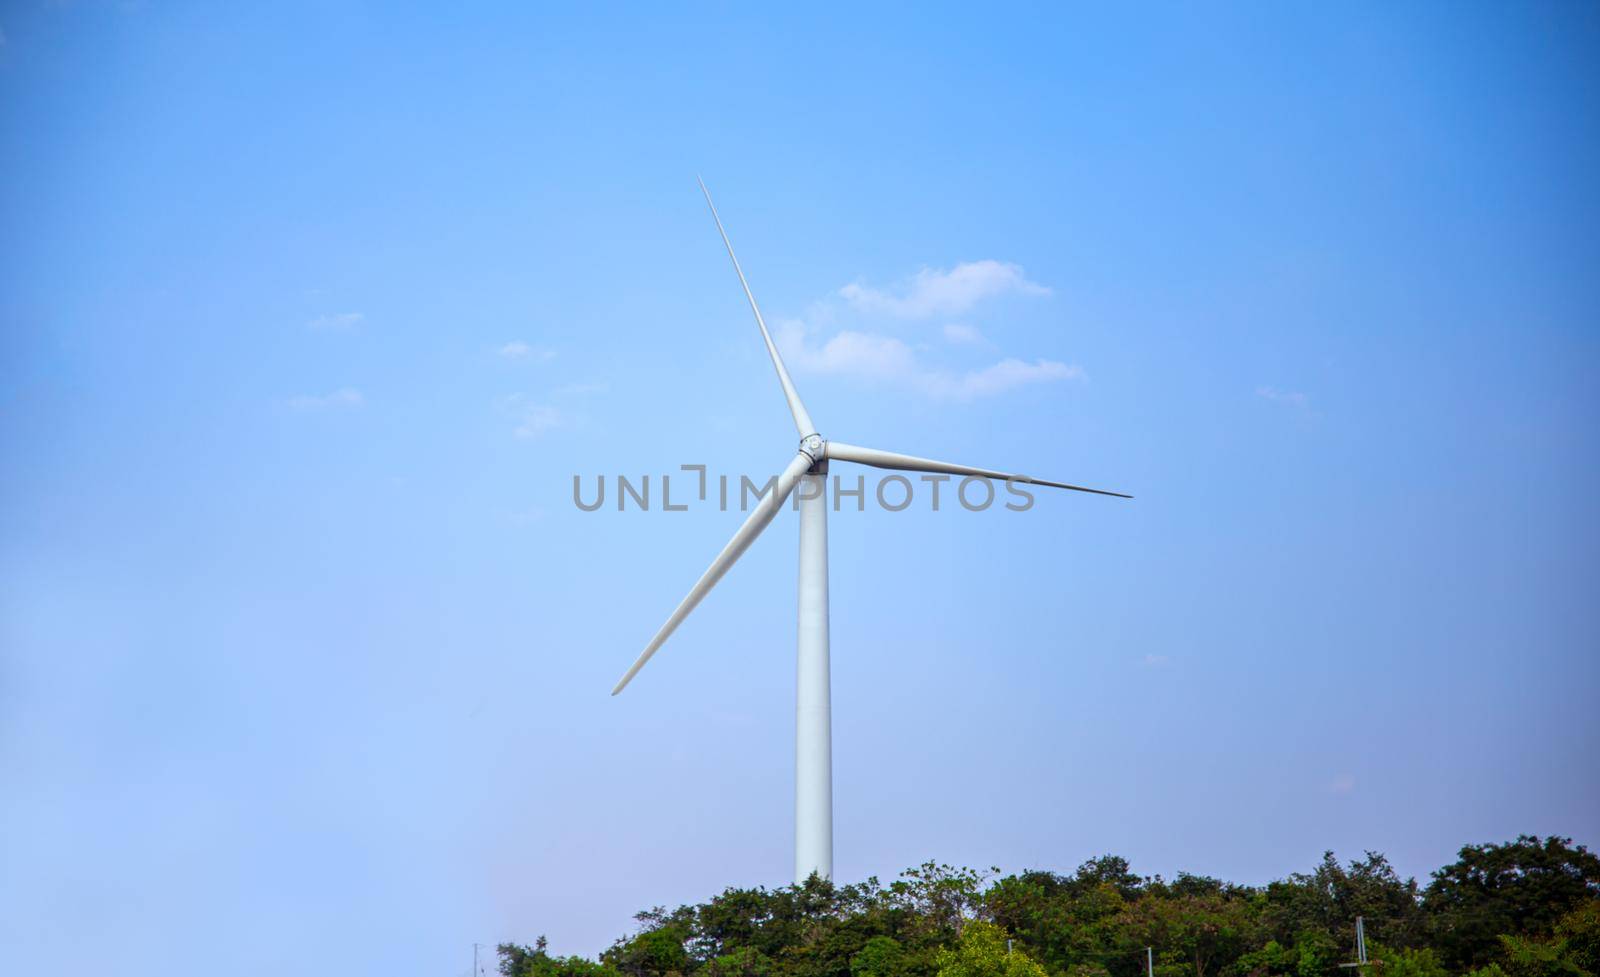 Wind power station. Wind generators stand in agricultural fields on mountain. Wonderful landscape shot from a great height. Modern green energy.